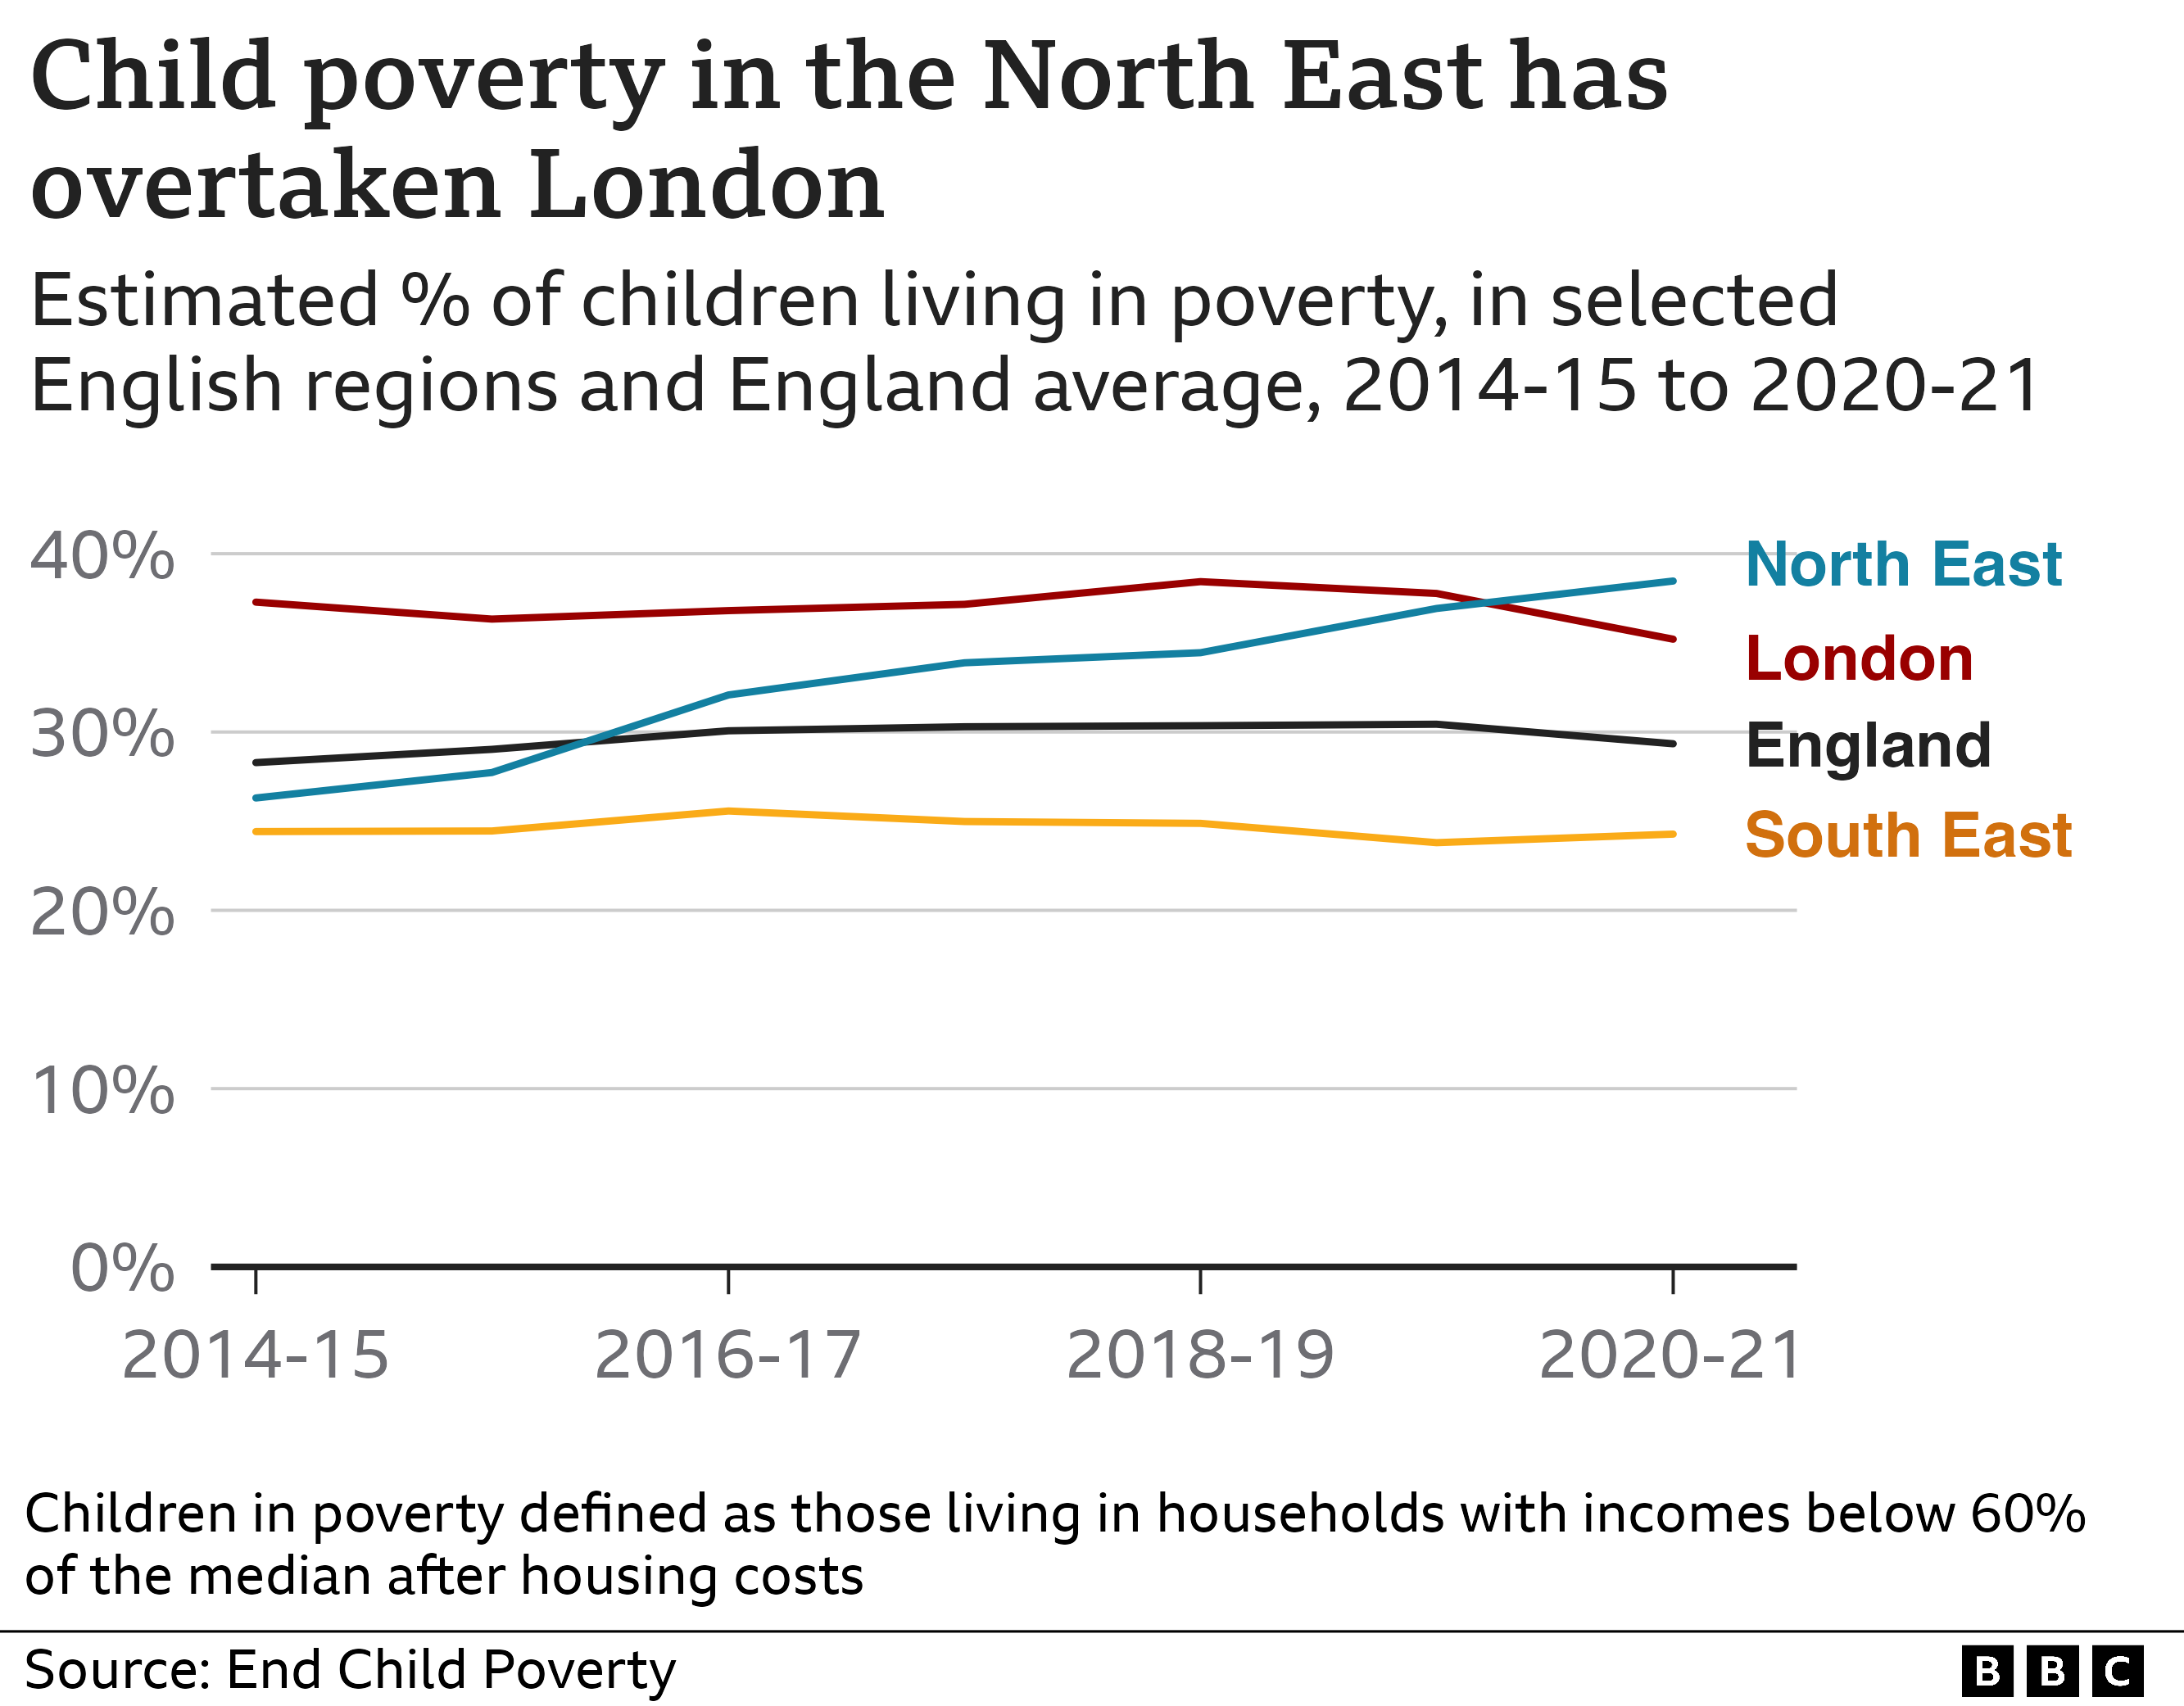 Chart showing rates of child poverty in different English regions